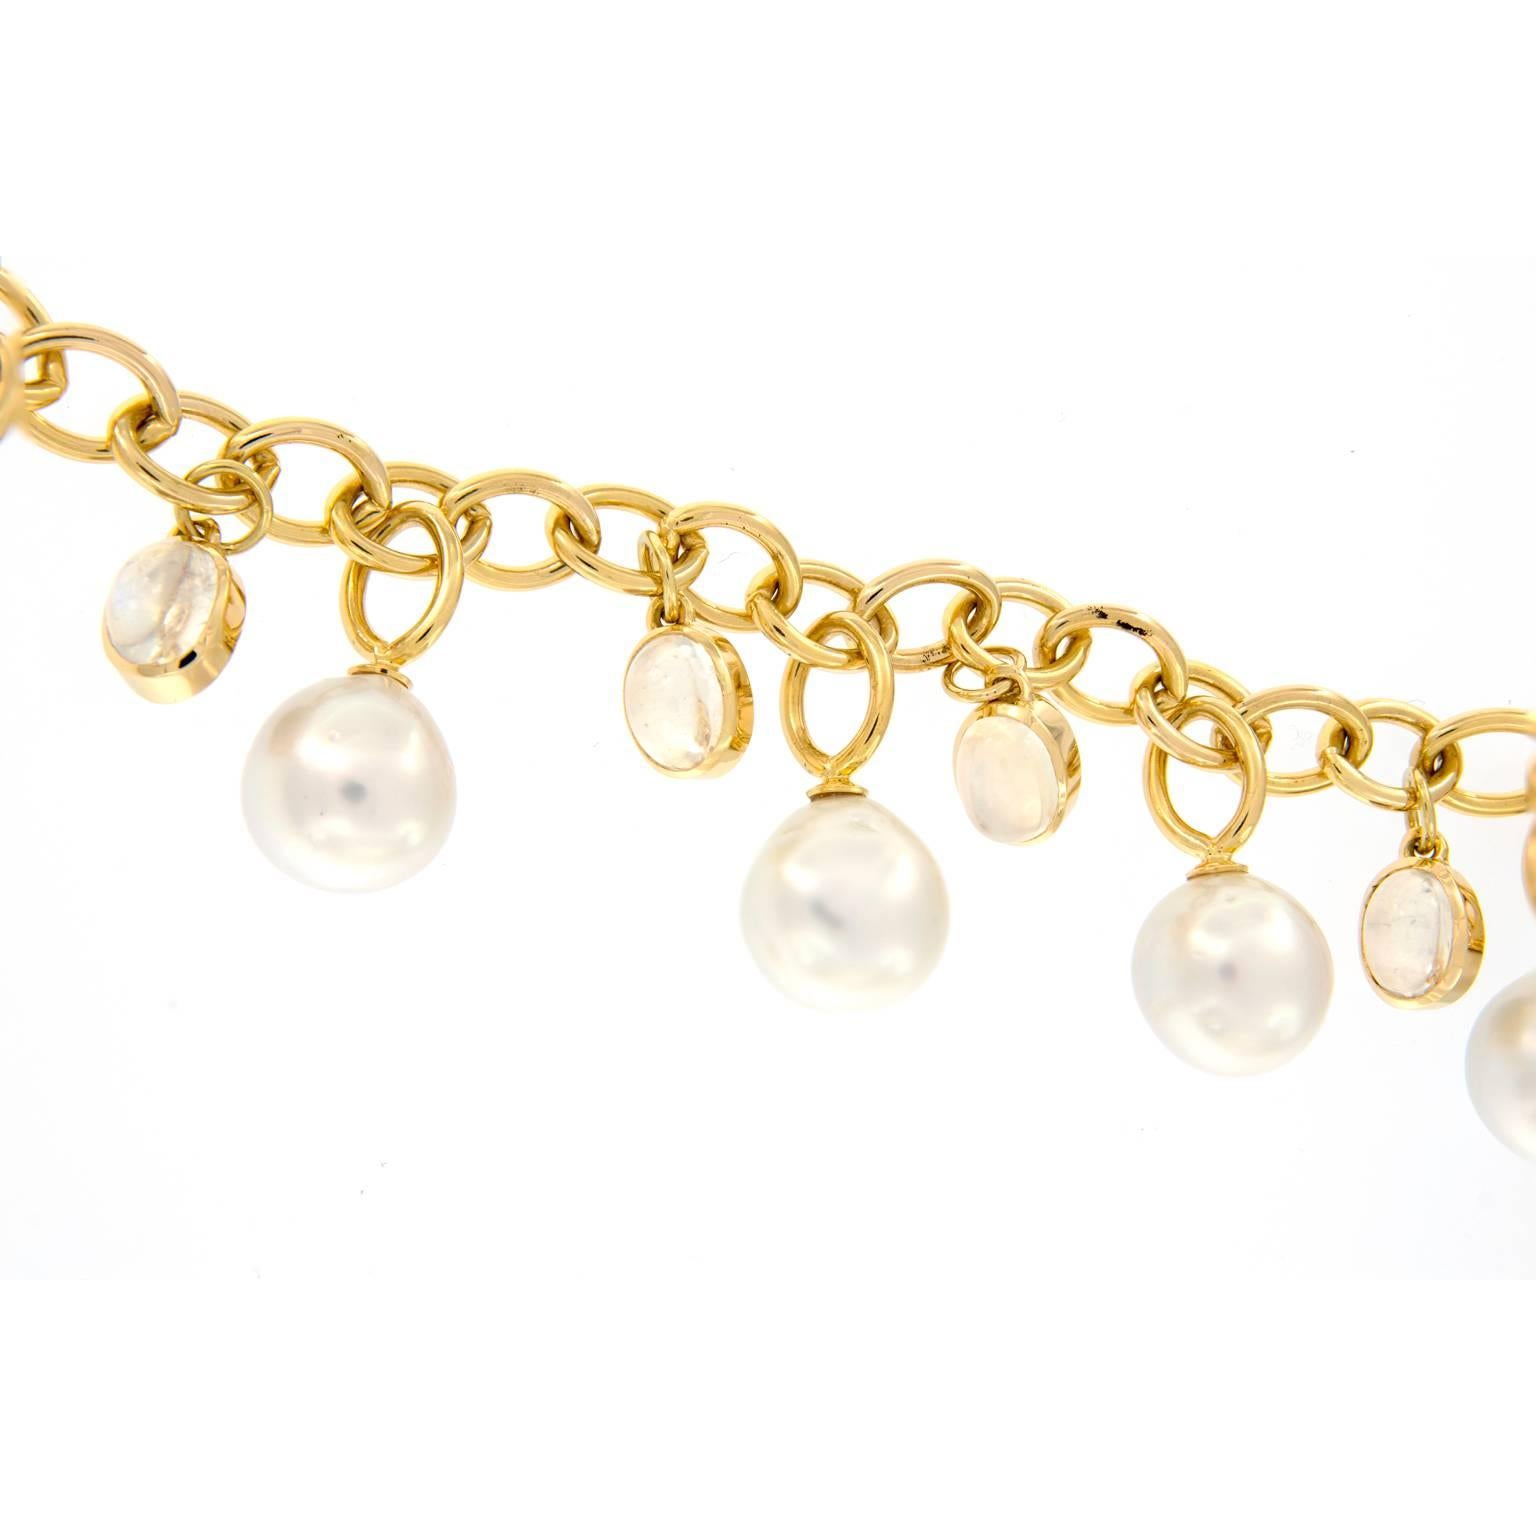 Beautiful baroque pearls and moonstones dangle from this 18k yellow gold link style charm bracelet from Assael.
Weighs 41.4 grams.

Moonstone 17.13 cttw ct